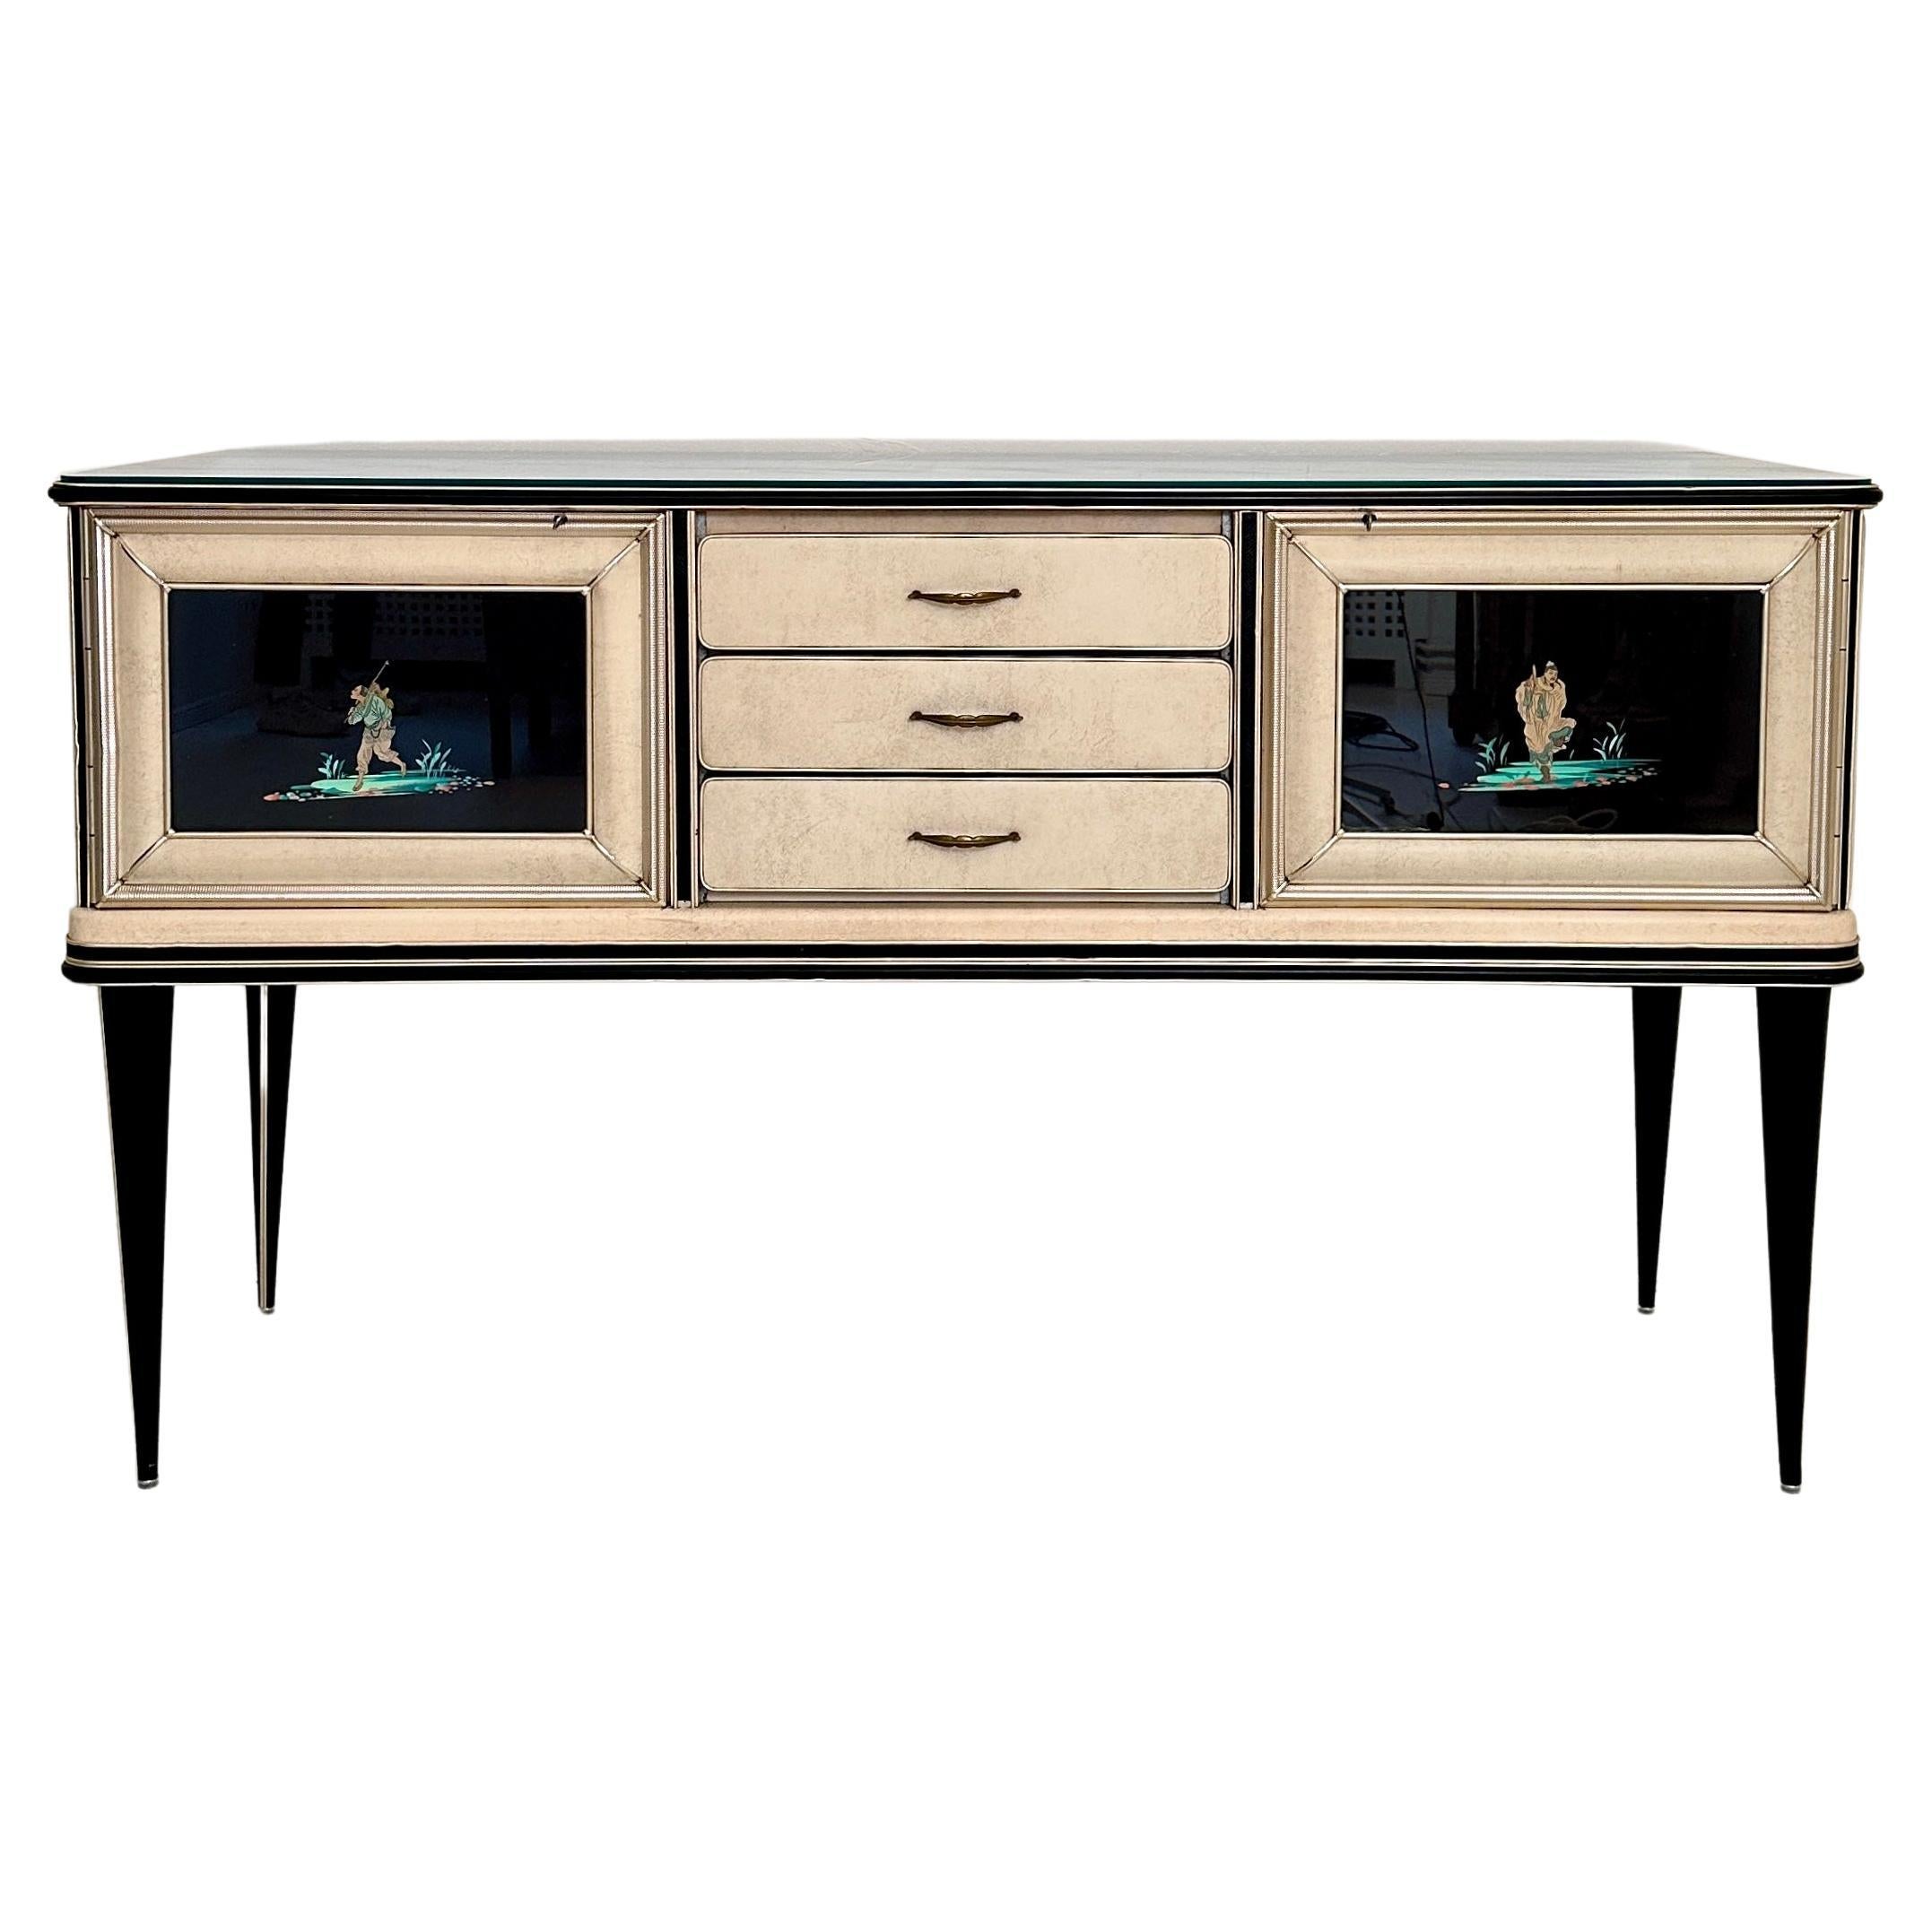 Mid-Century Chinoserie Sideboard by Umberto Mascagni for Harrods London, 1953